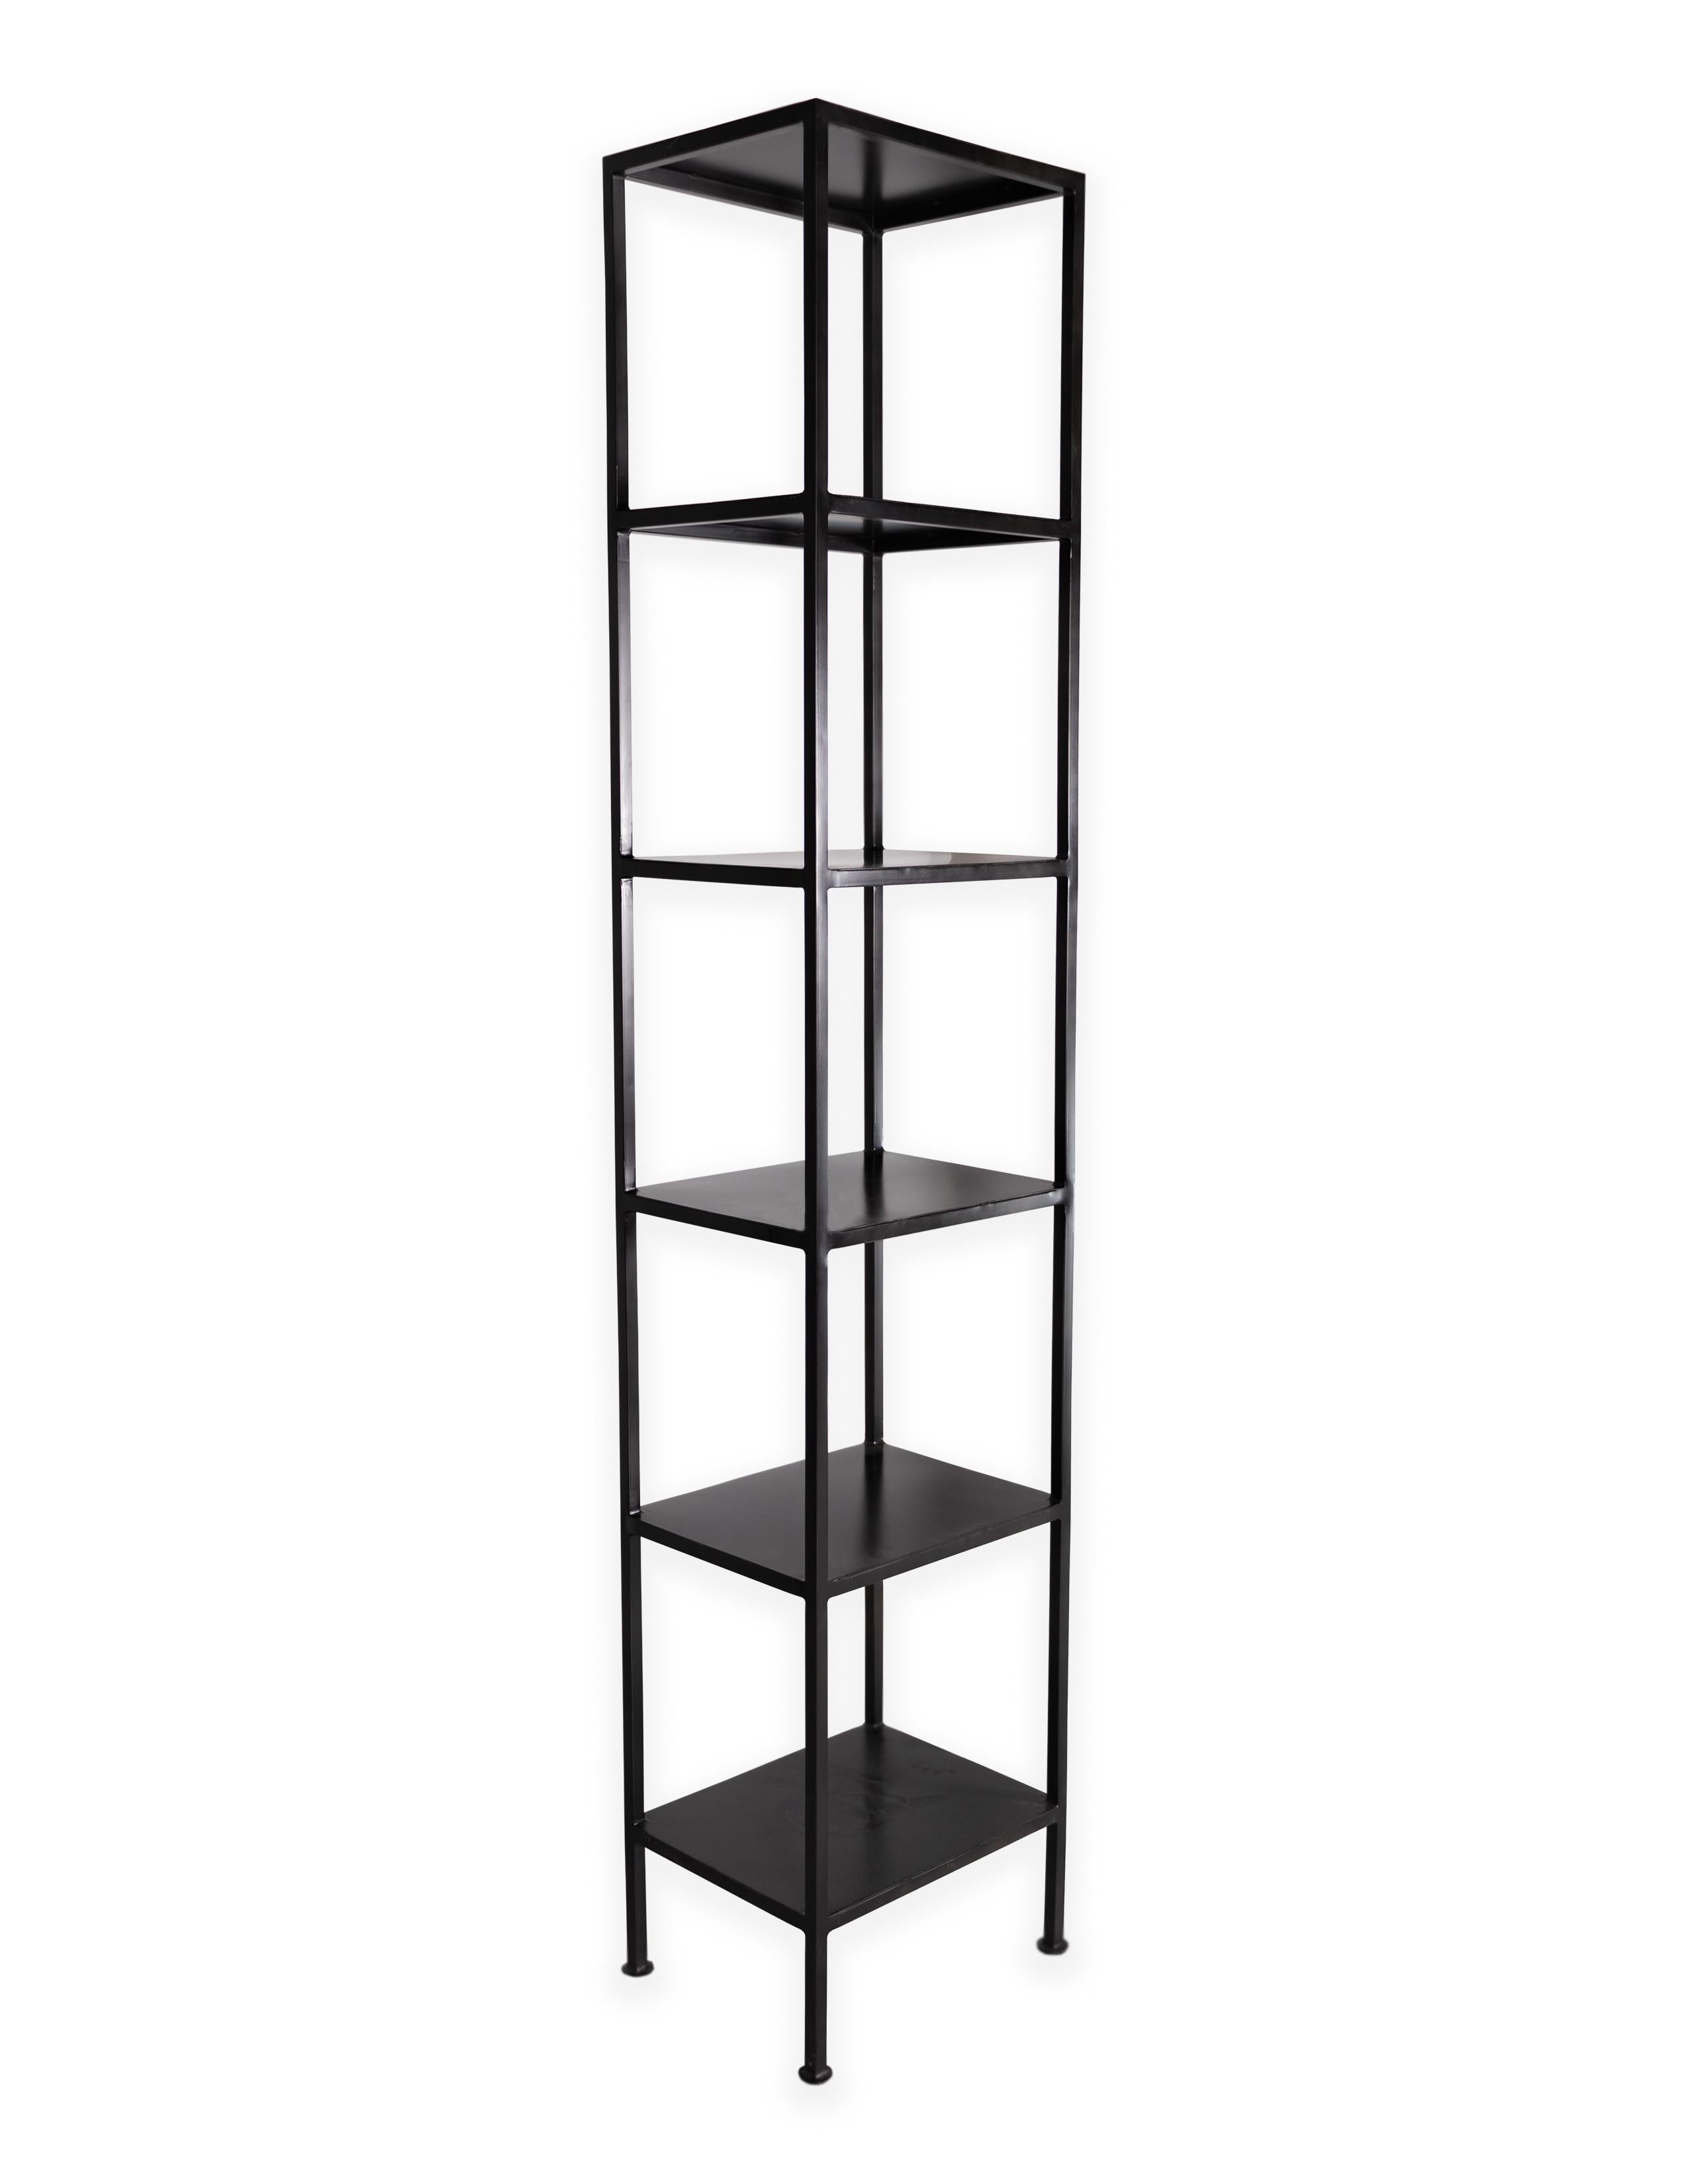 Minimalist steel and tole etagere

Open shelf bookcase.

One of a kind piece from our Le Monde collection. Exclusive to Brendan Bass.